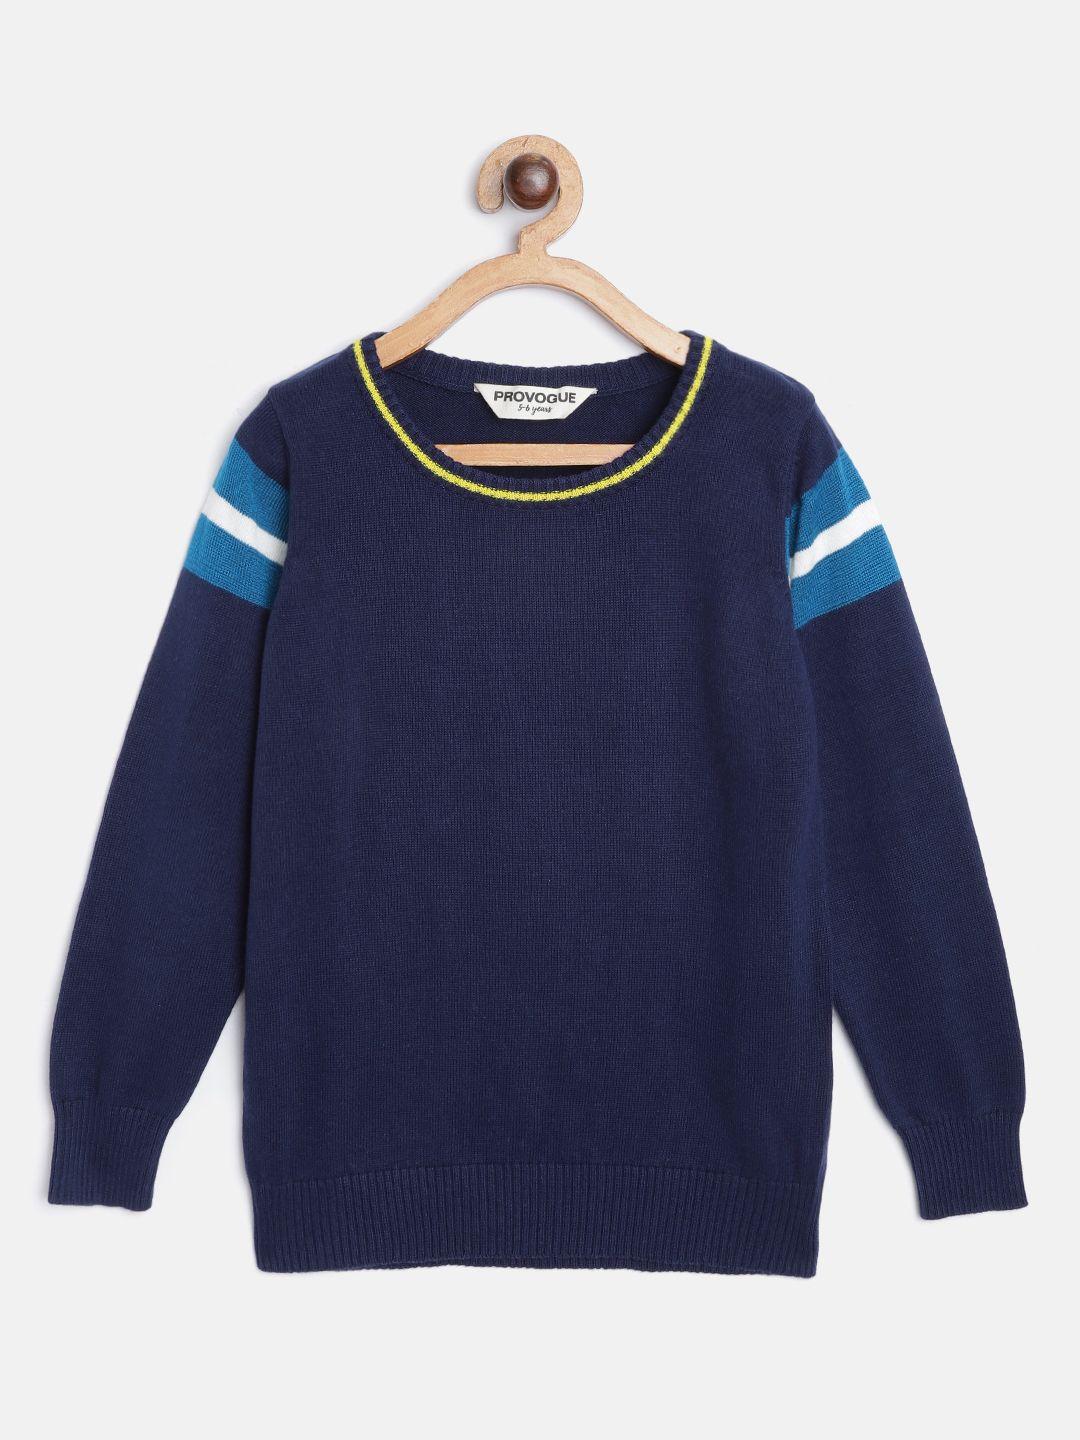 provogue boys navy blue cotton solid sweater